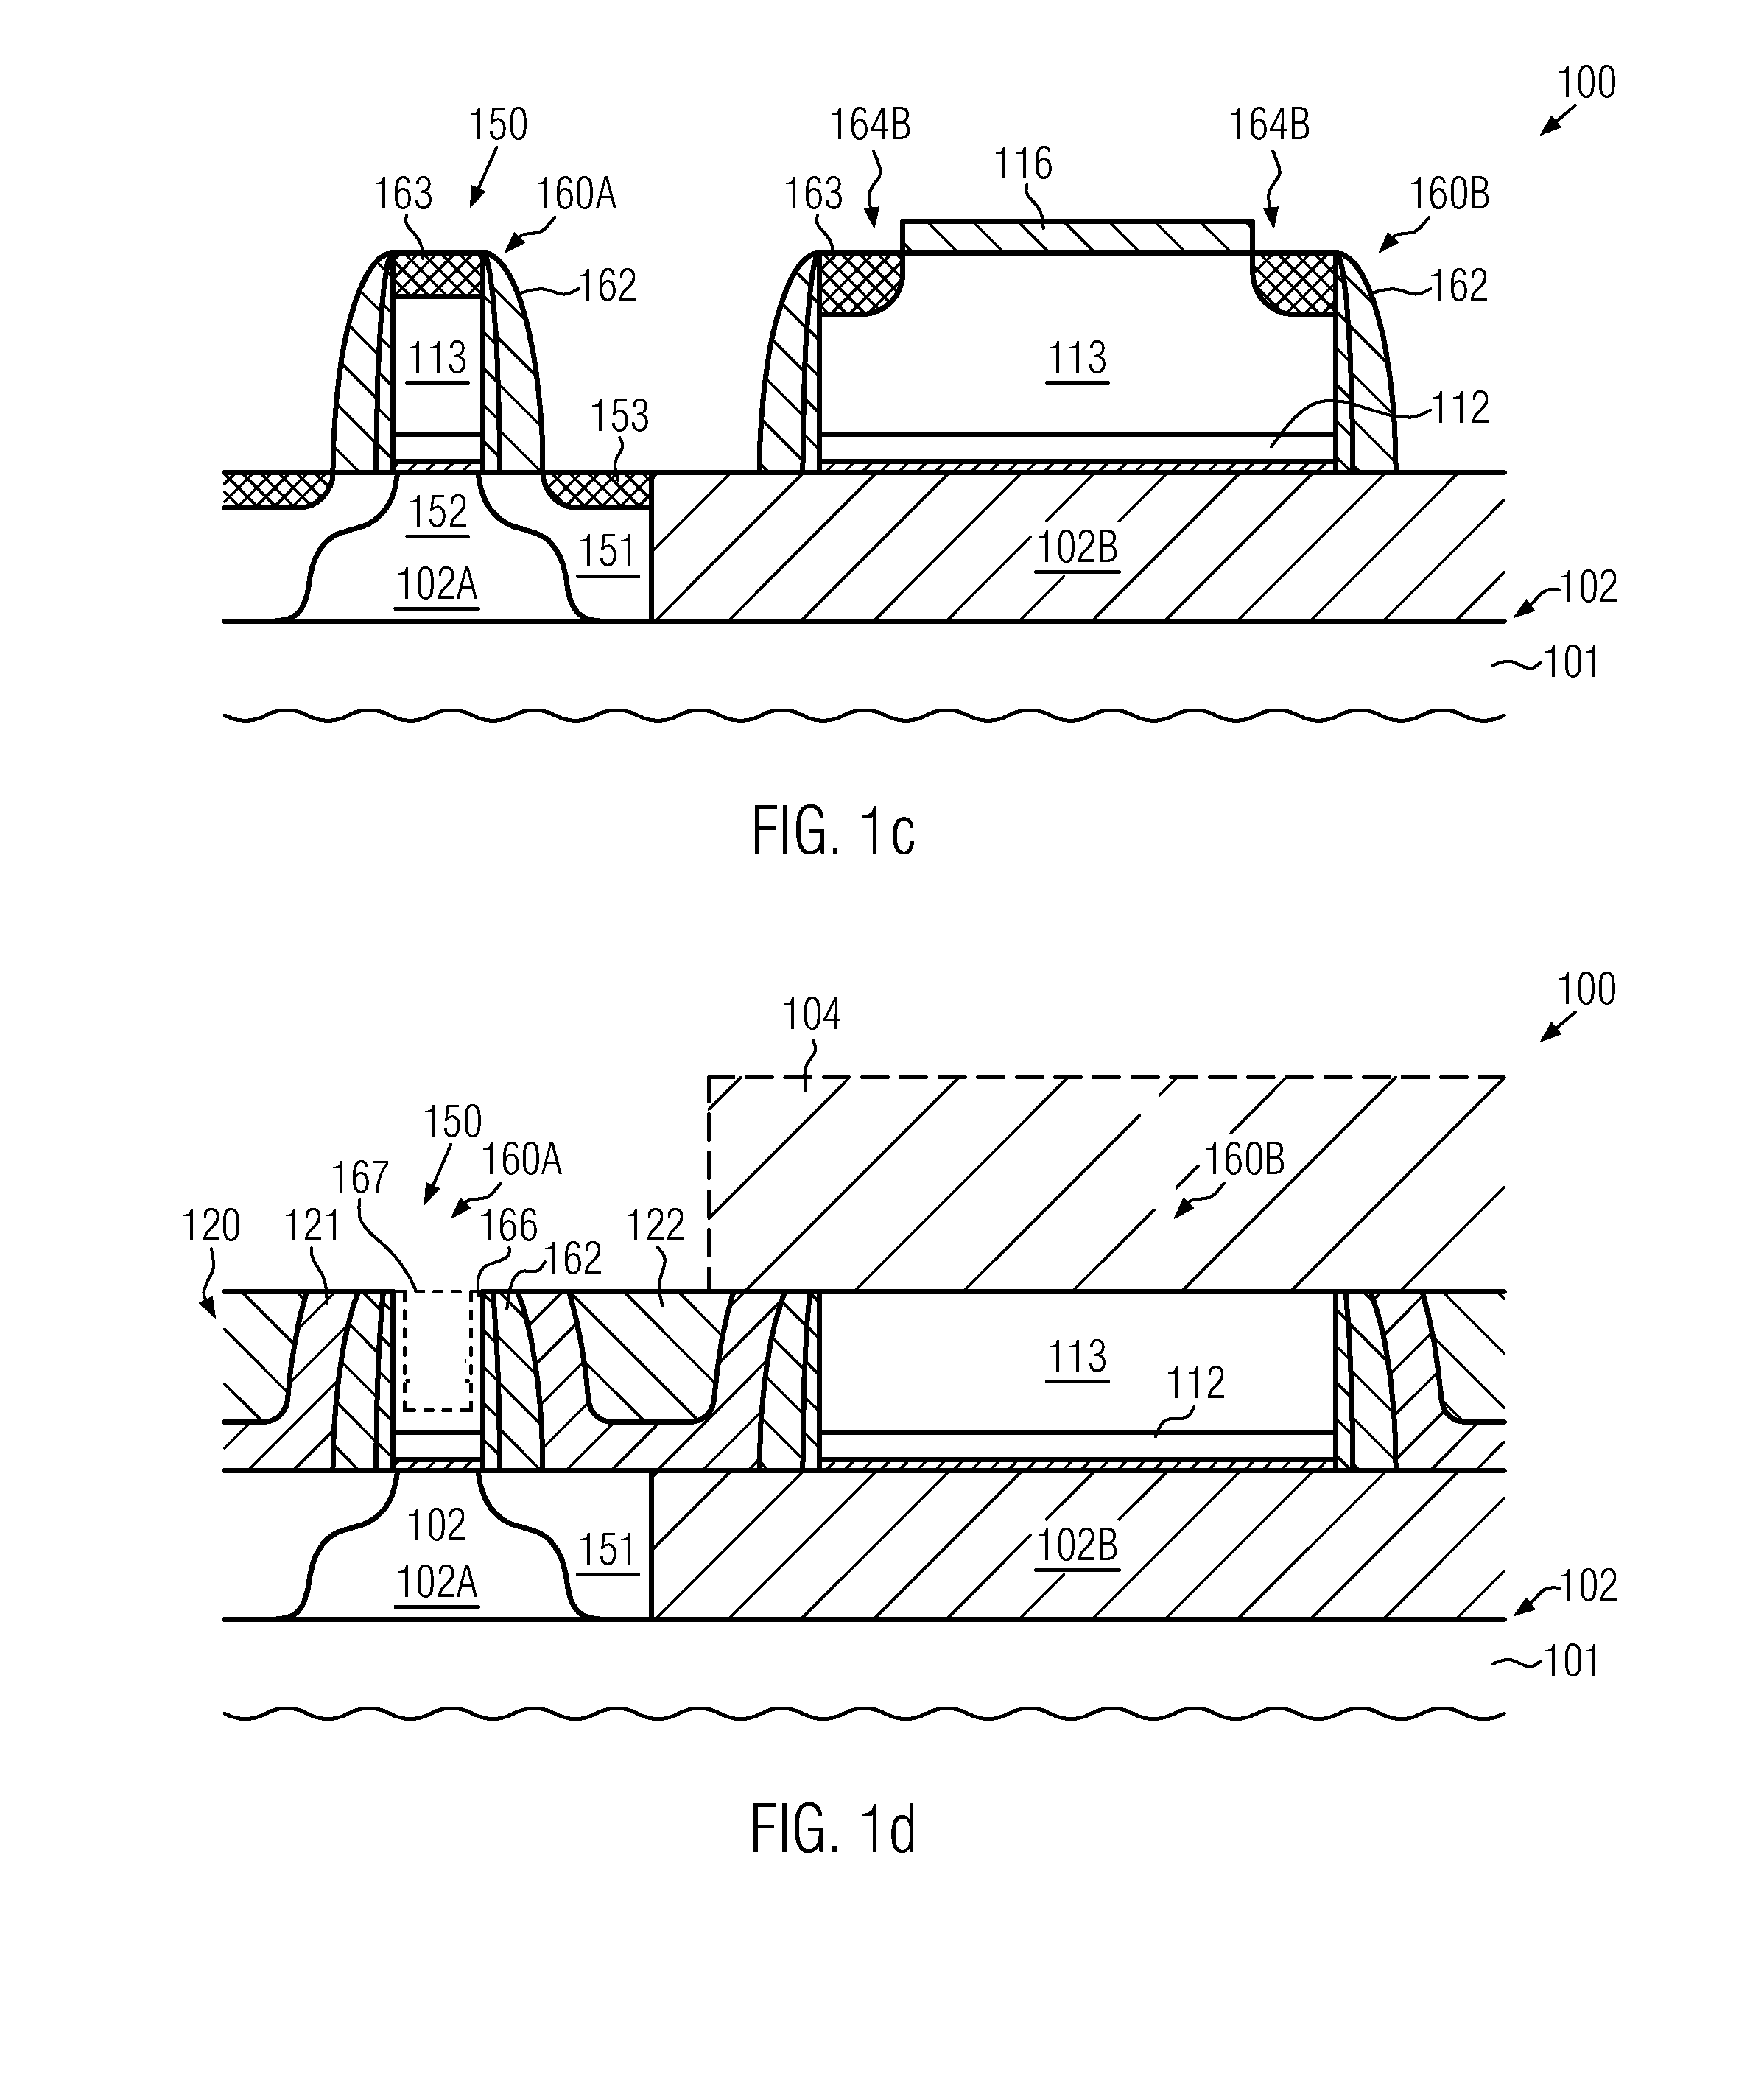 Polysilicon Resistors Formed in a Semiconductor Device Comprising High-K Metal Gate Electrode Structures